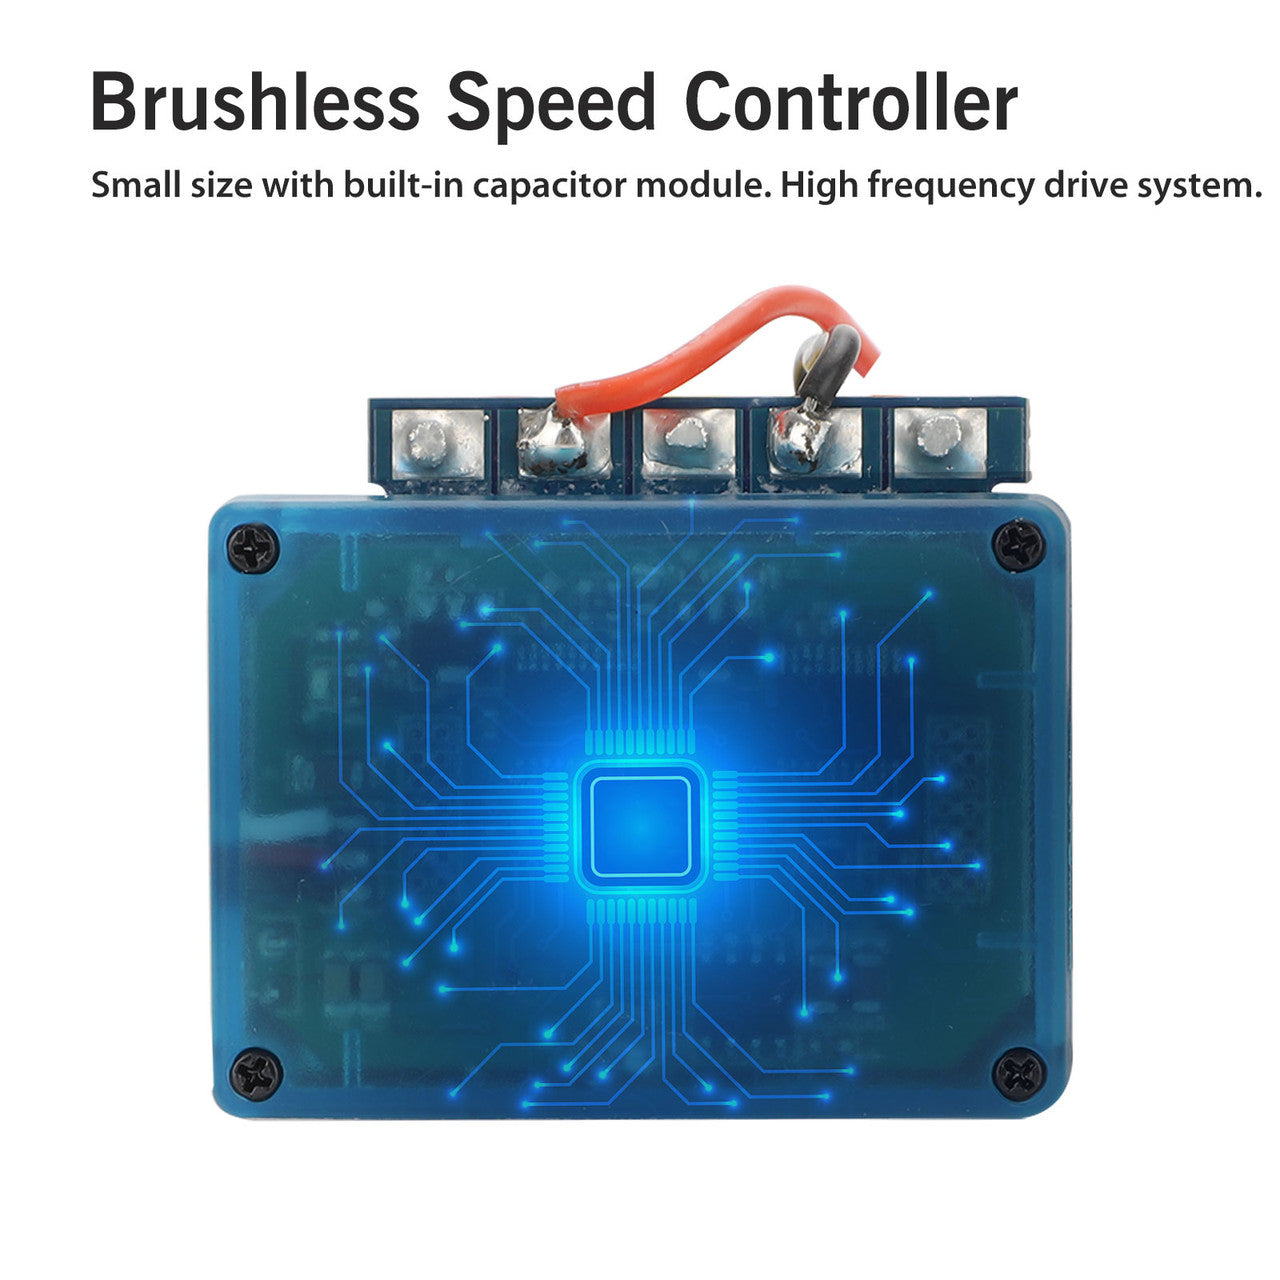 For RC Cars Brushless Speed Controller, 5V/3A Output, Over-heat Protection